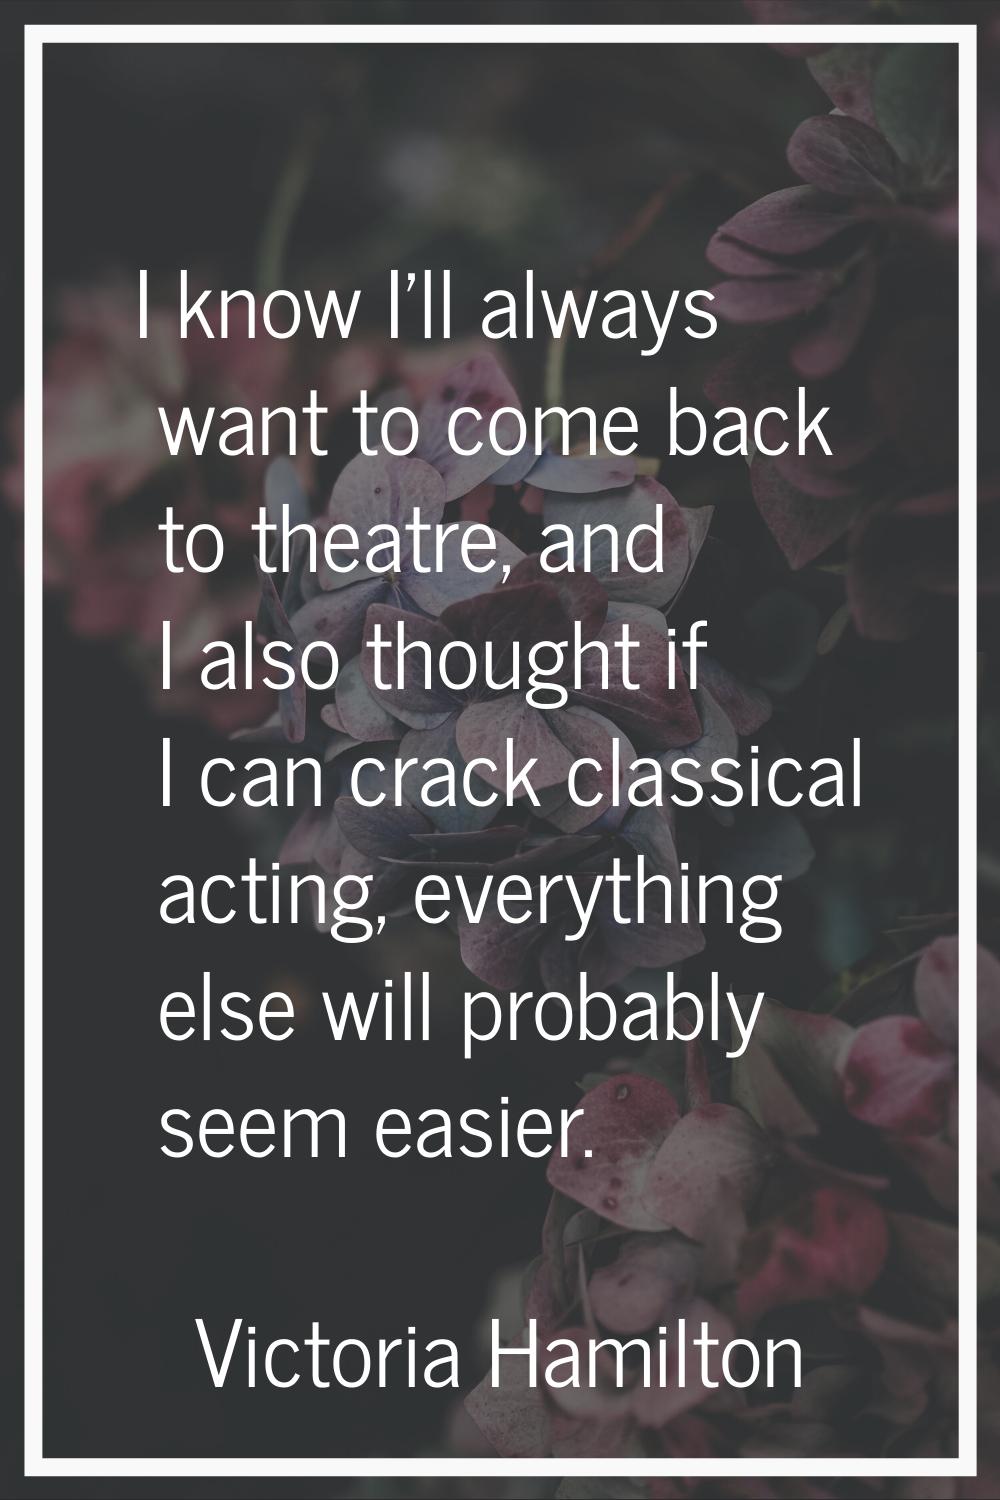 I know I'll always want to come back to theatre, and I also thought if I can crack classical acting